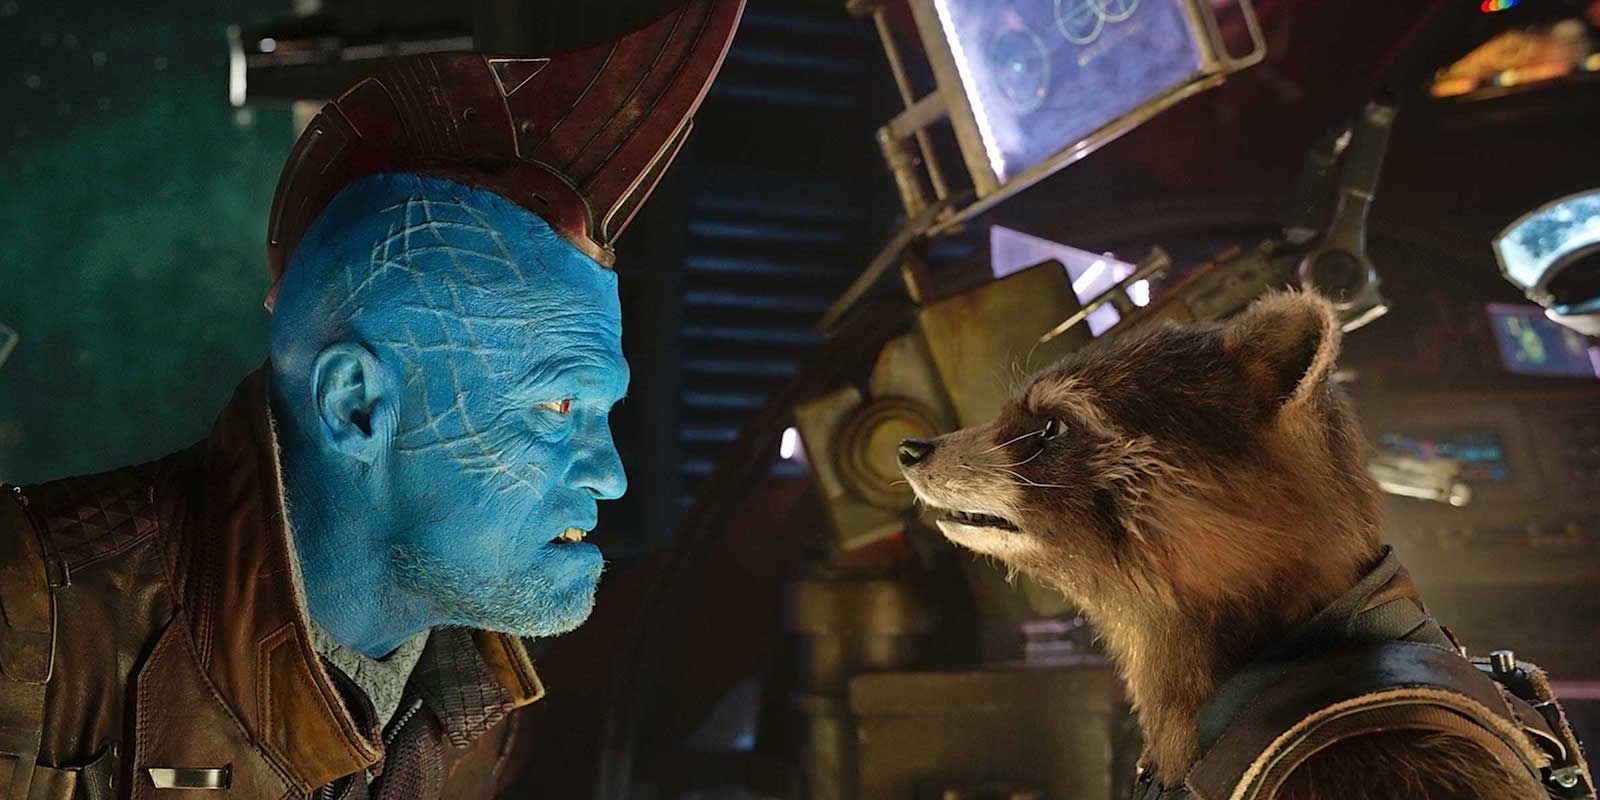 Guardians of the Galaxy Vol 2 Empire Photo of Yondu and Rocket Cropped